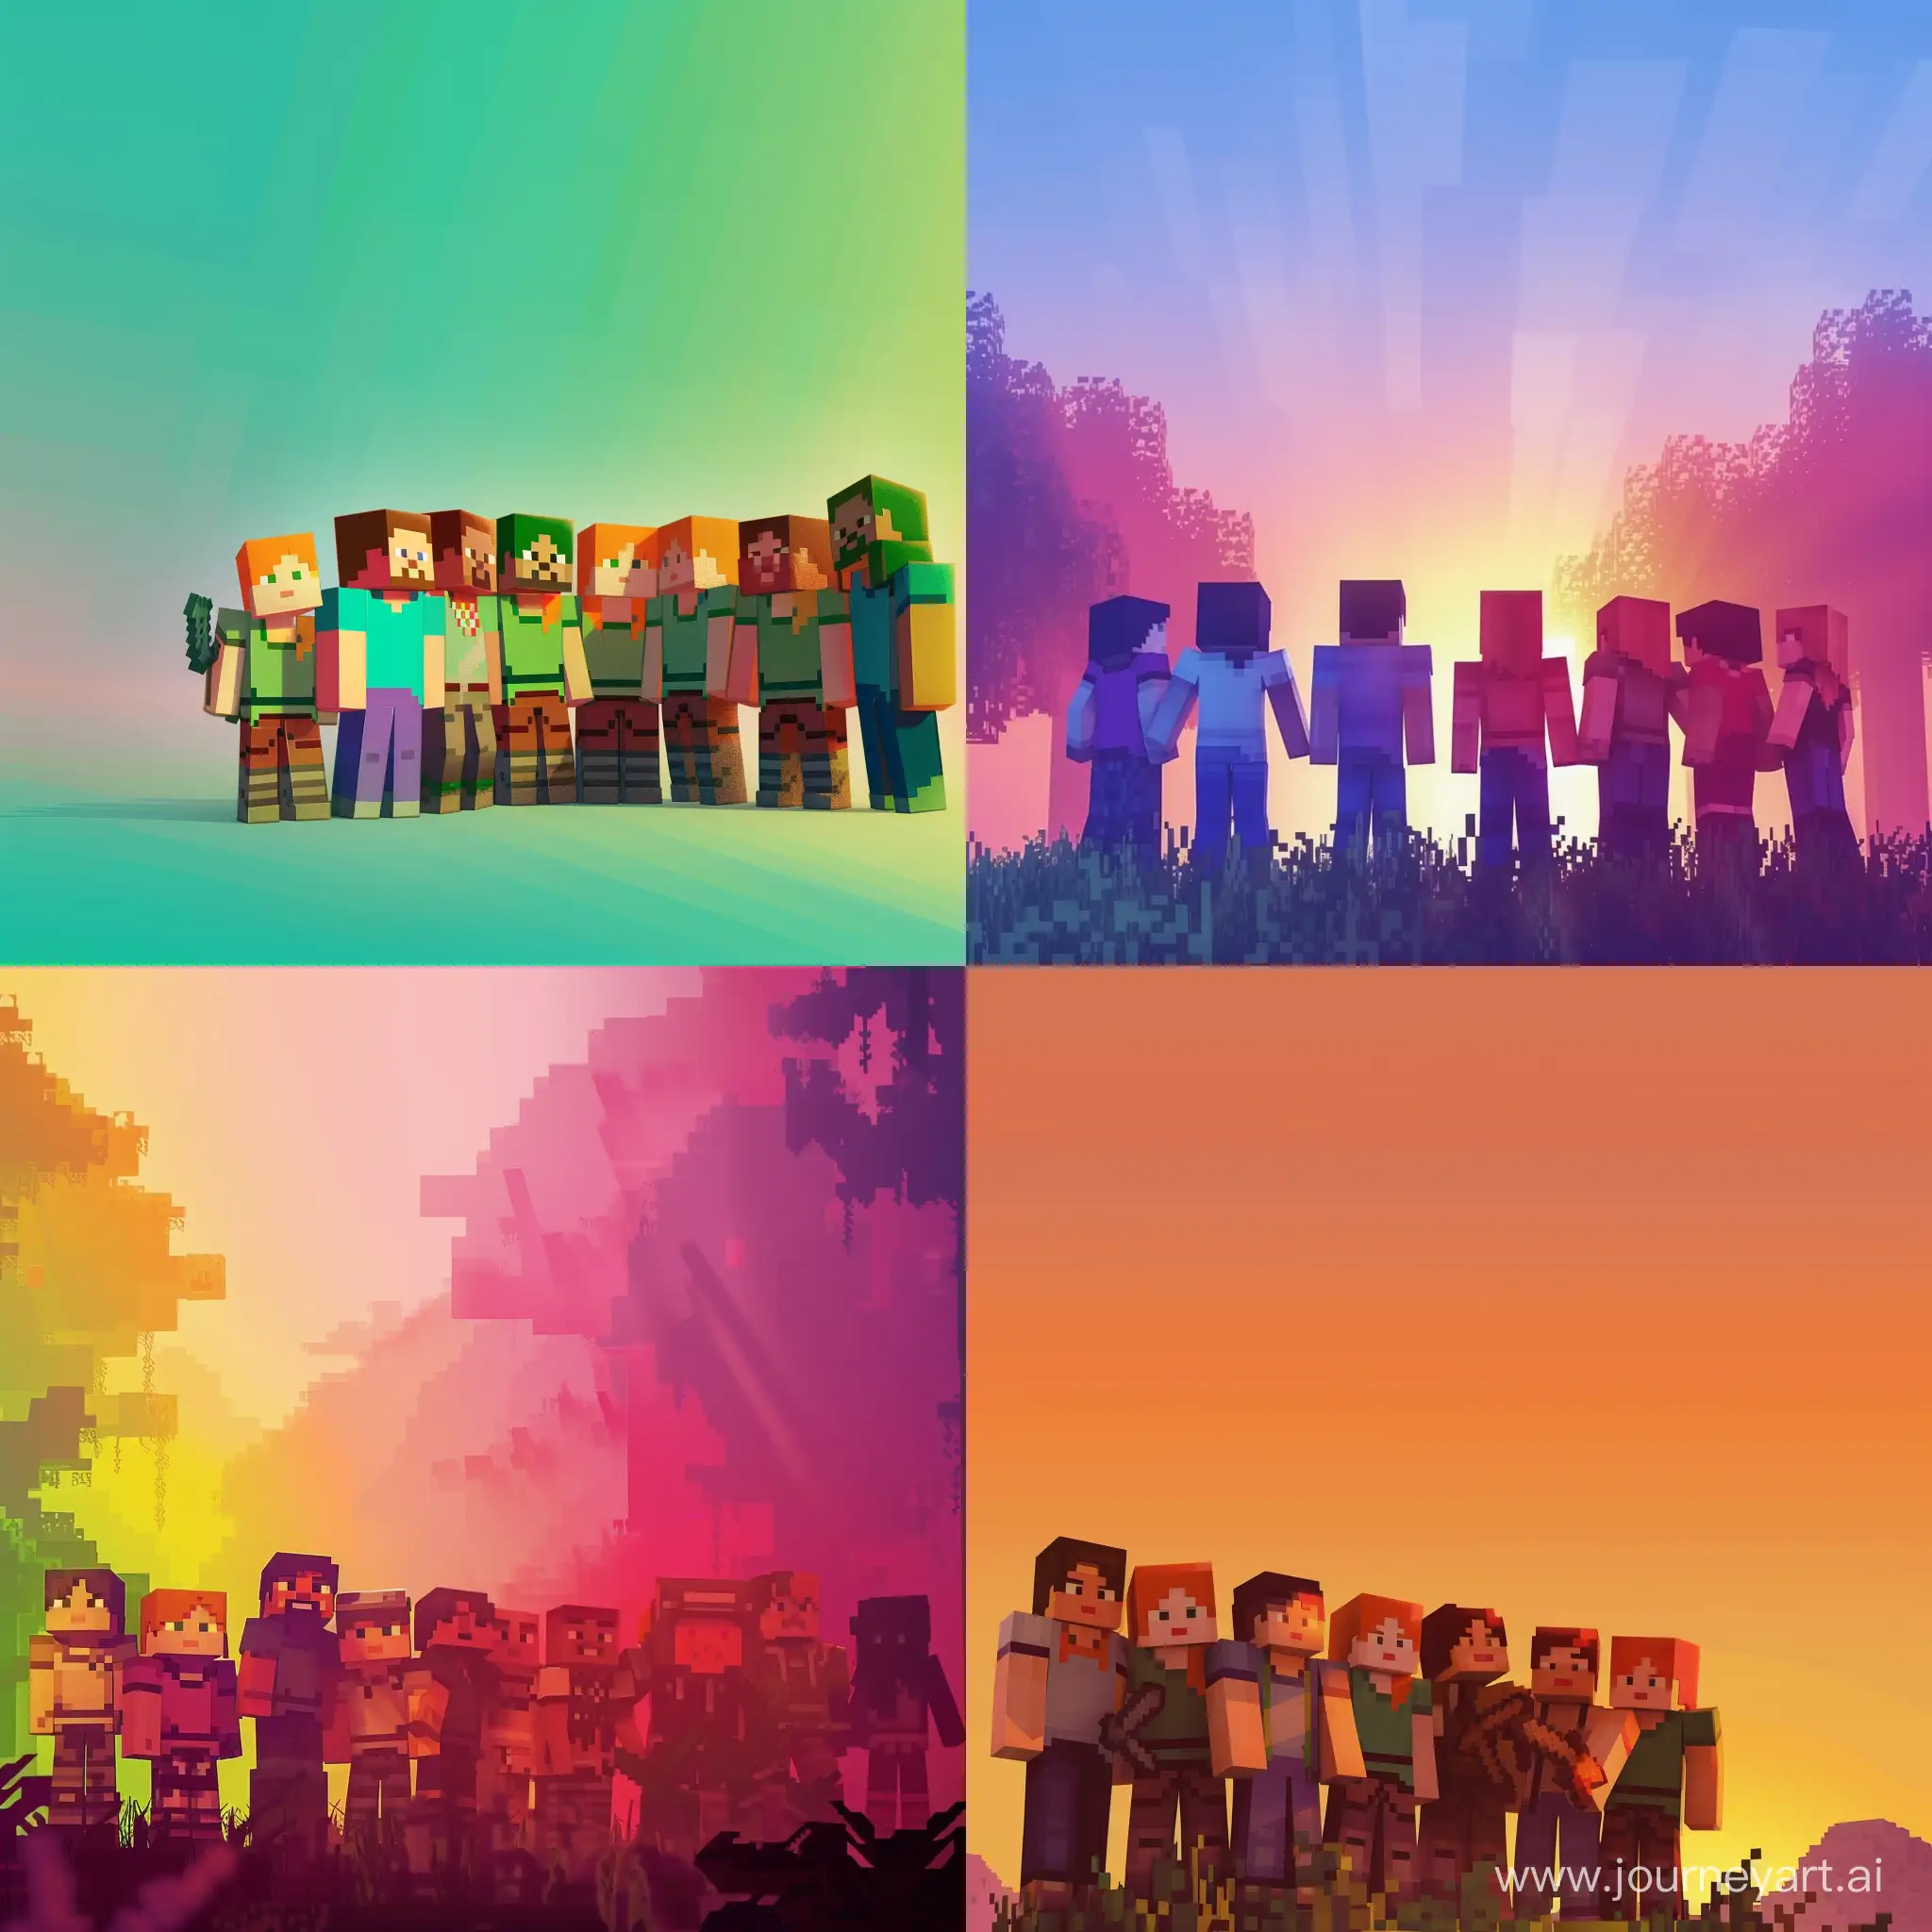 MinecraftThemed-Group-Banner-with-Friends-in-Nature-Tones-Gradient-Background